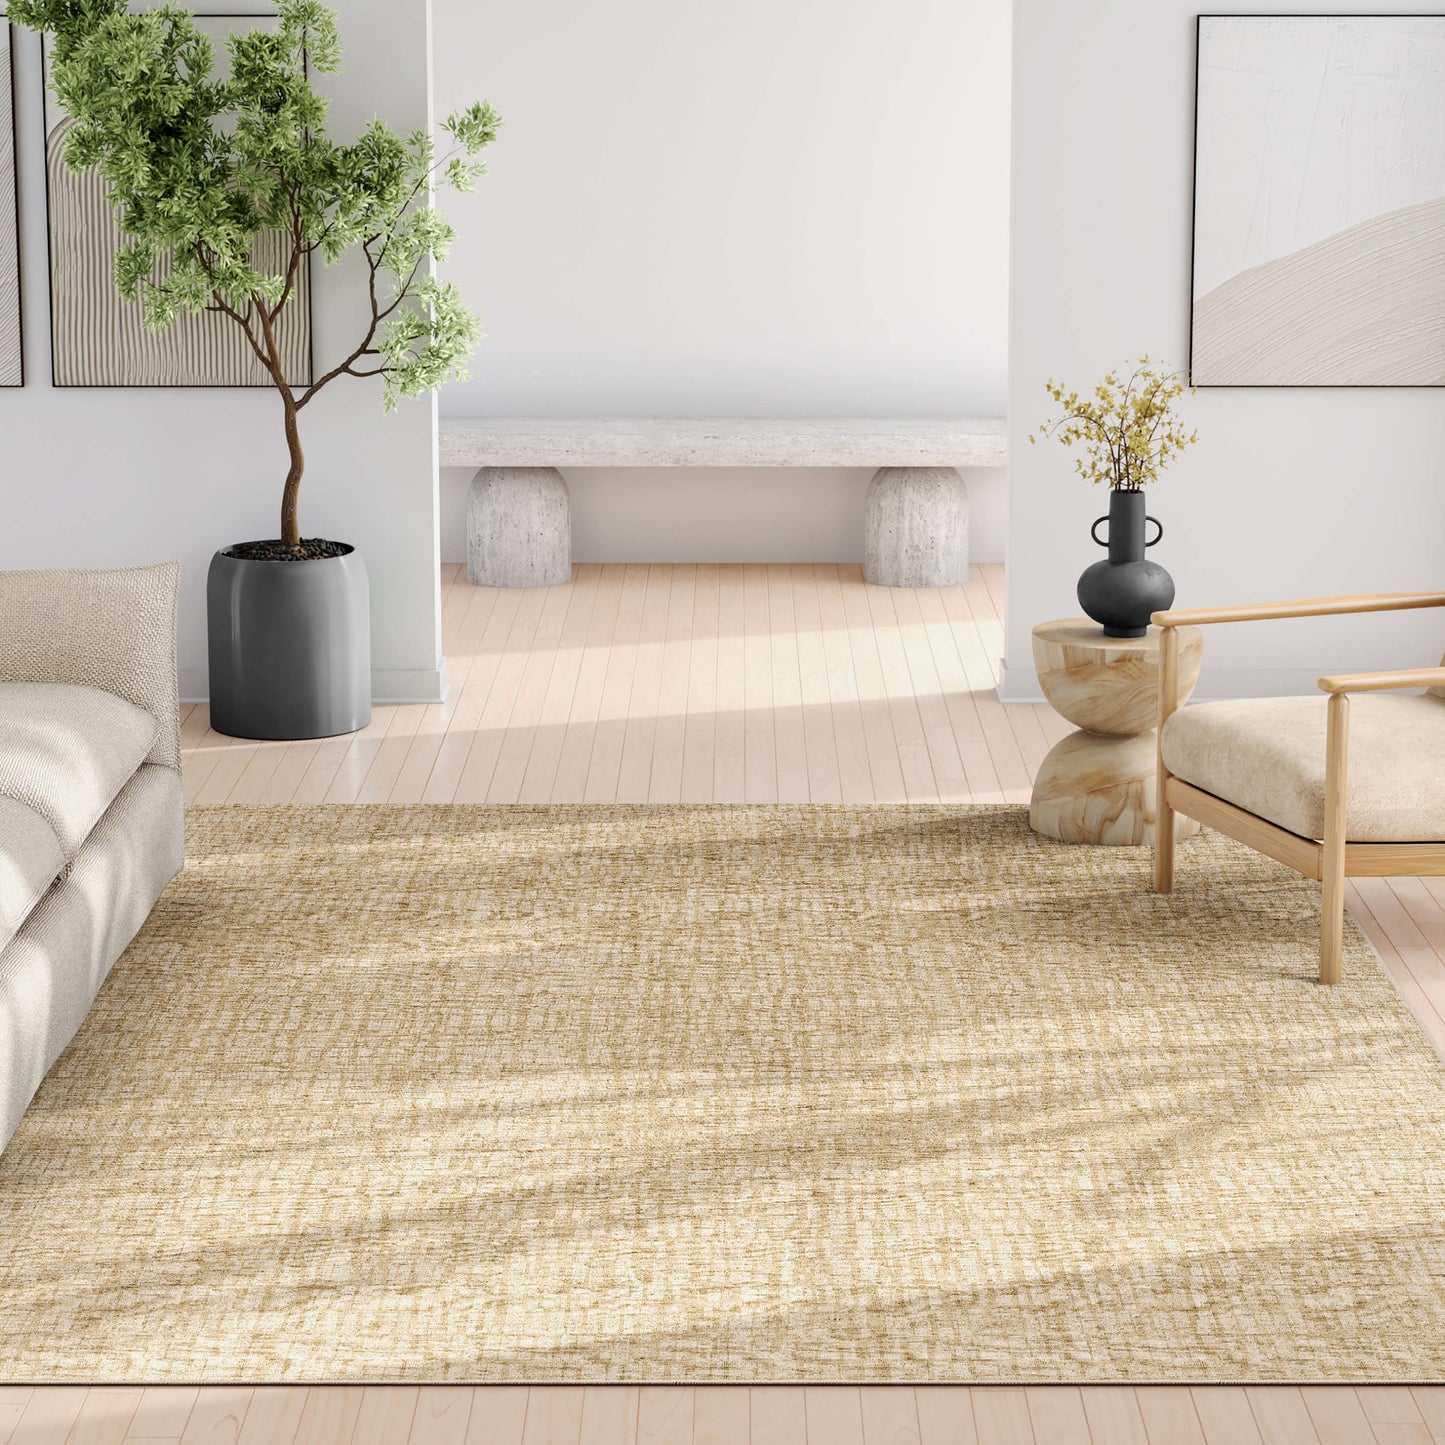 Abstract Nightscape Beige Rug W-AB-39D